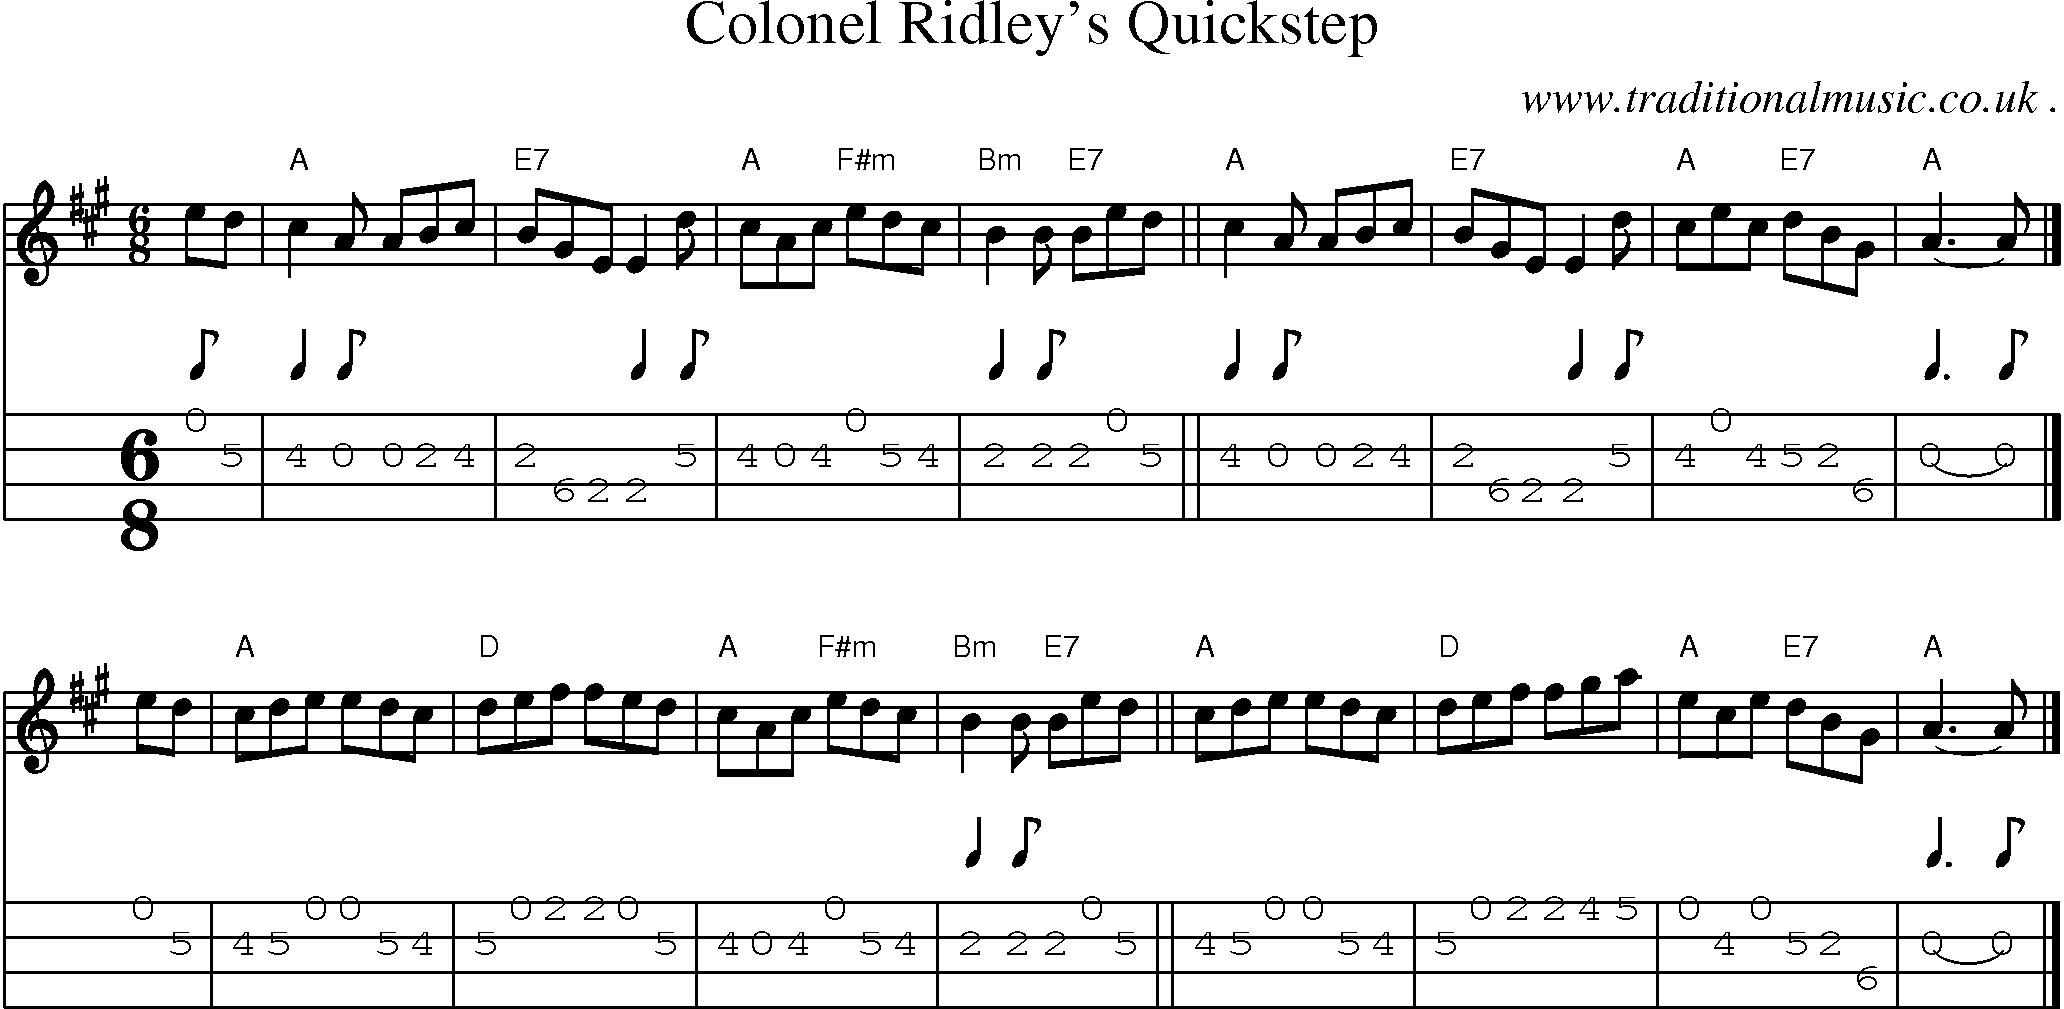 Sheet-music  score, Chords and Mandolin Tabs for Colonel Ridleys Quickstep